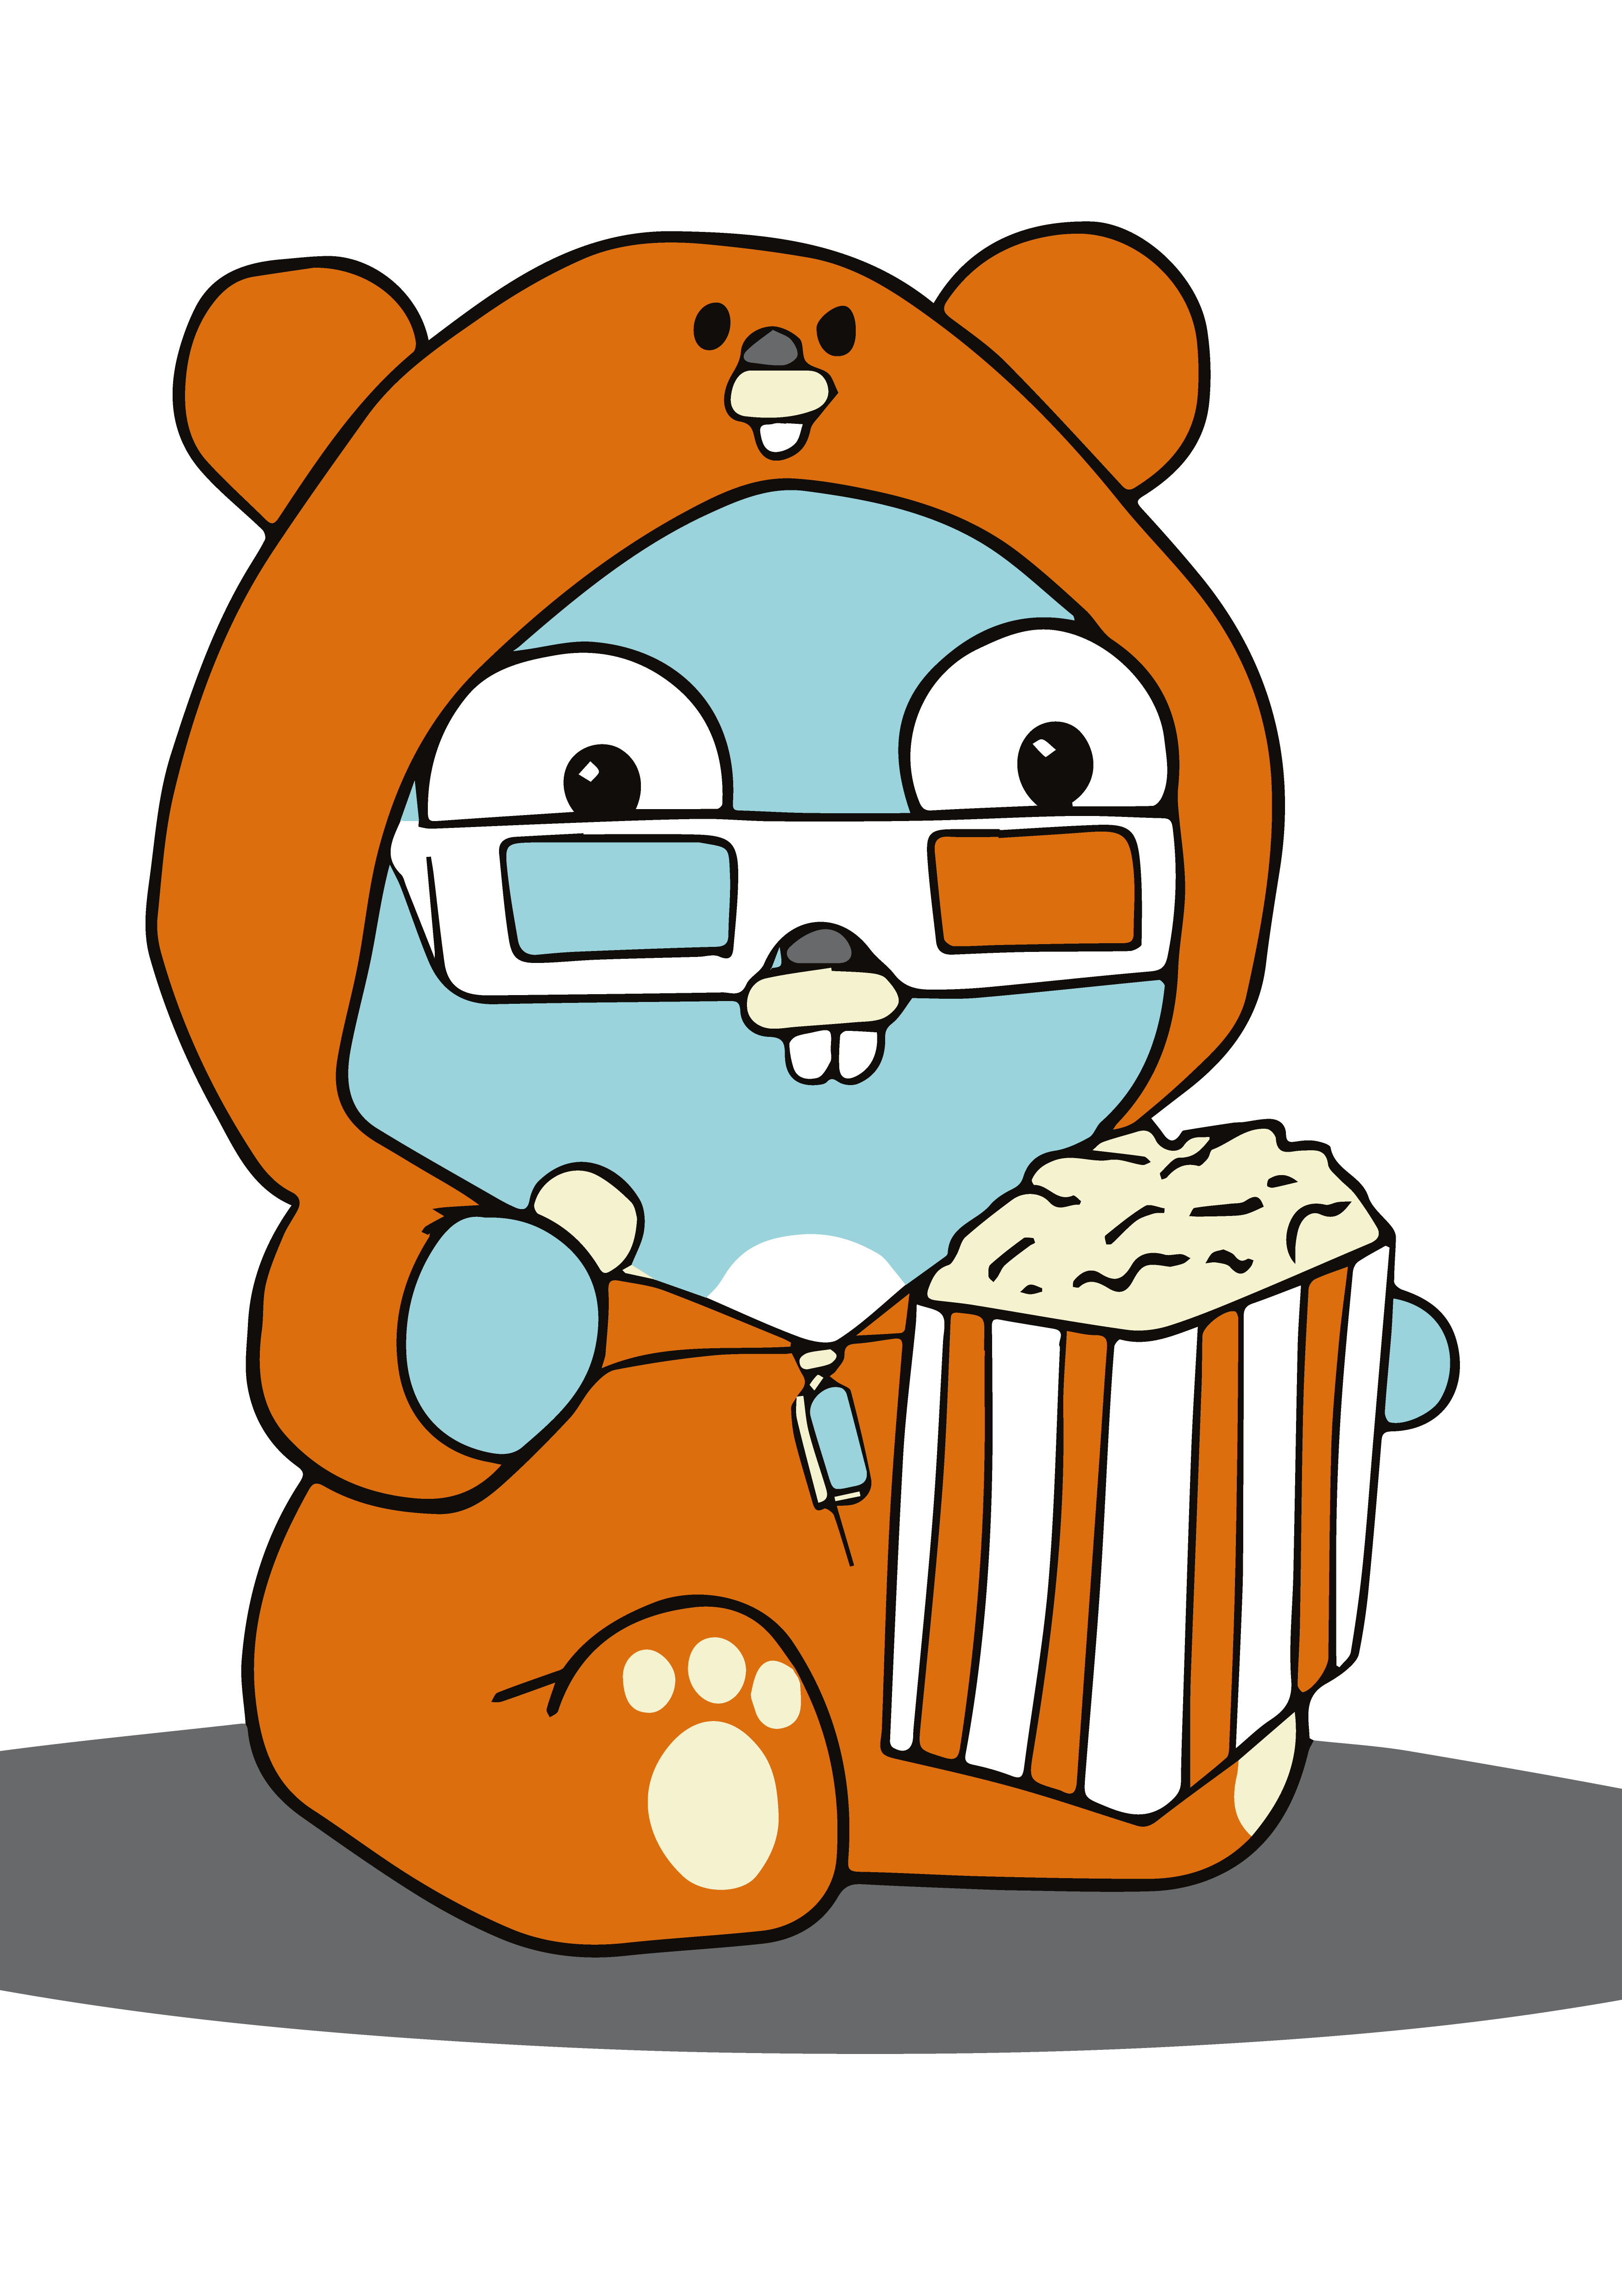 A cute gopher eating popcorn